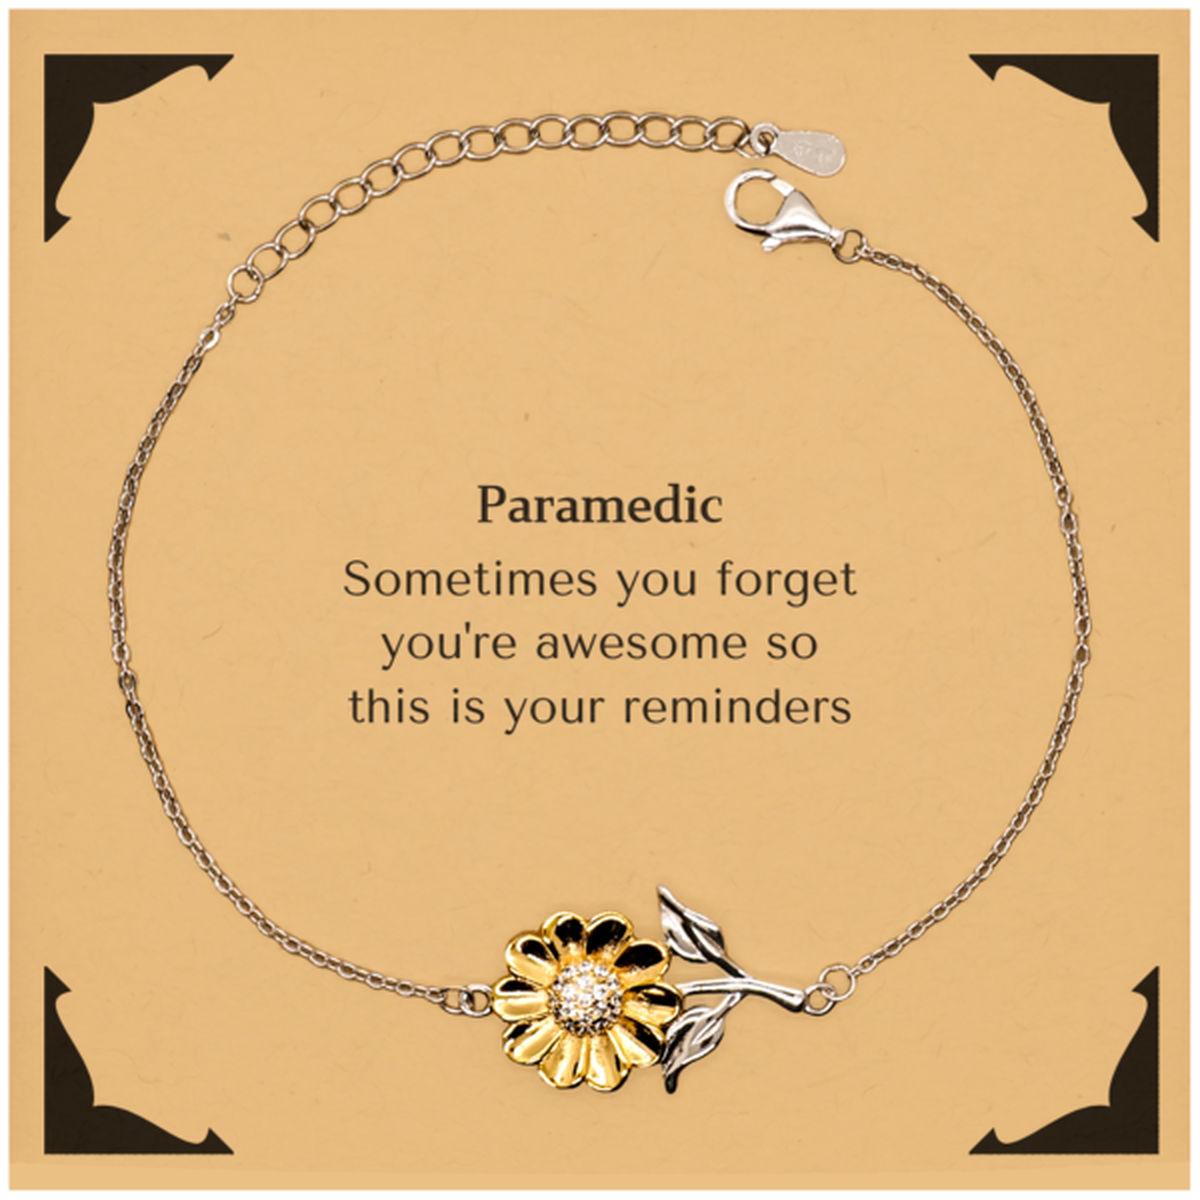 Sentimental Paramedic Sunflower Bracelet, Paramedic Sometimes you forget you're awesome so this is your reminders, Graduation Christmas Birthday Gifts for Paramedic, Men, Women, Coworkers